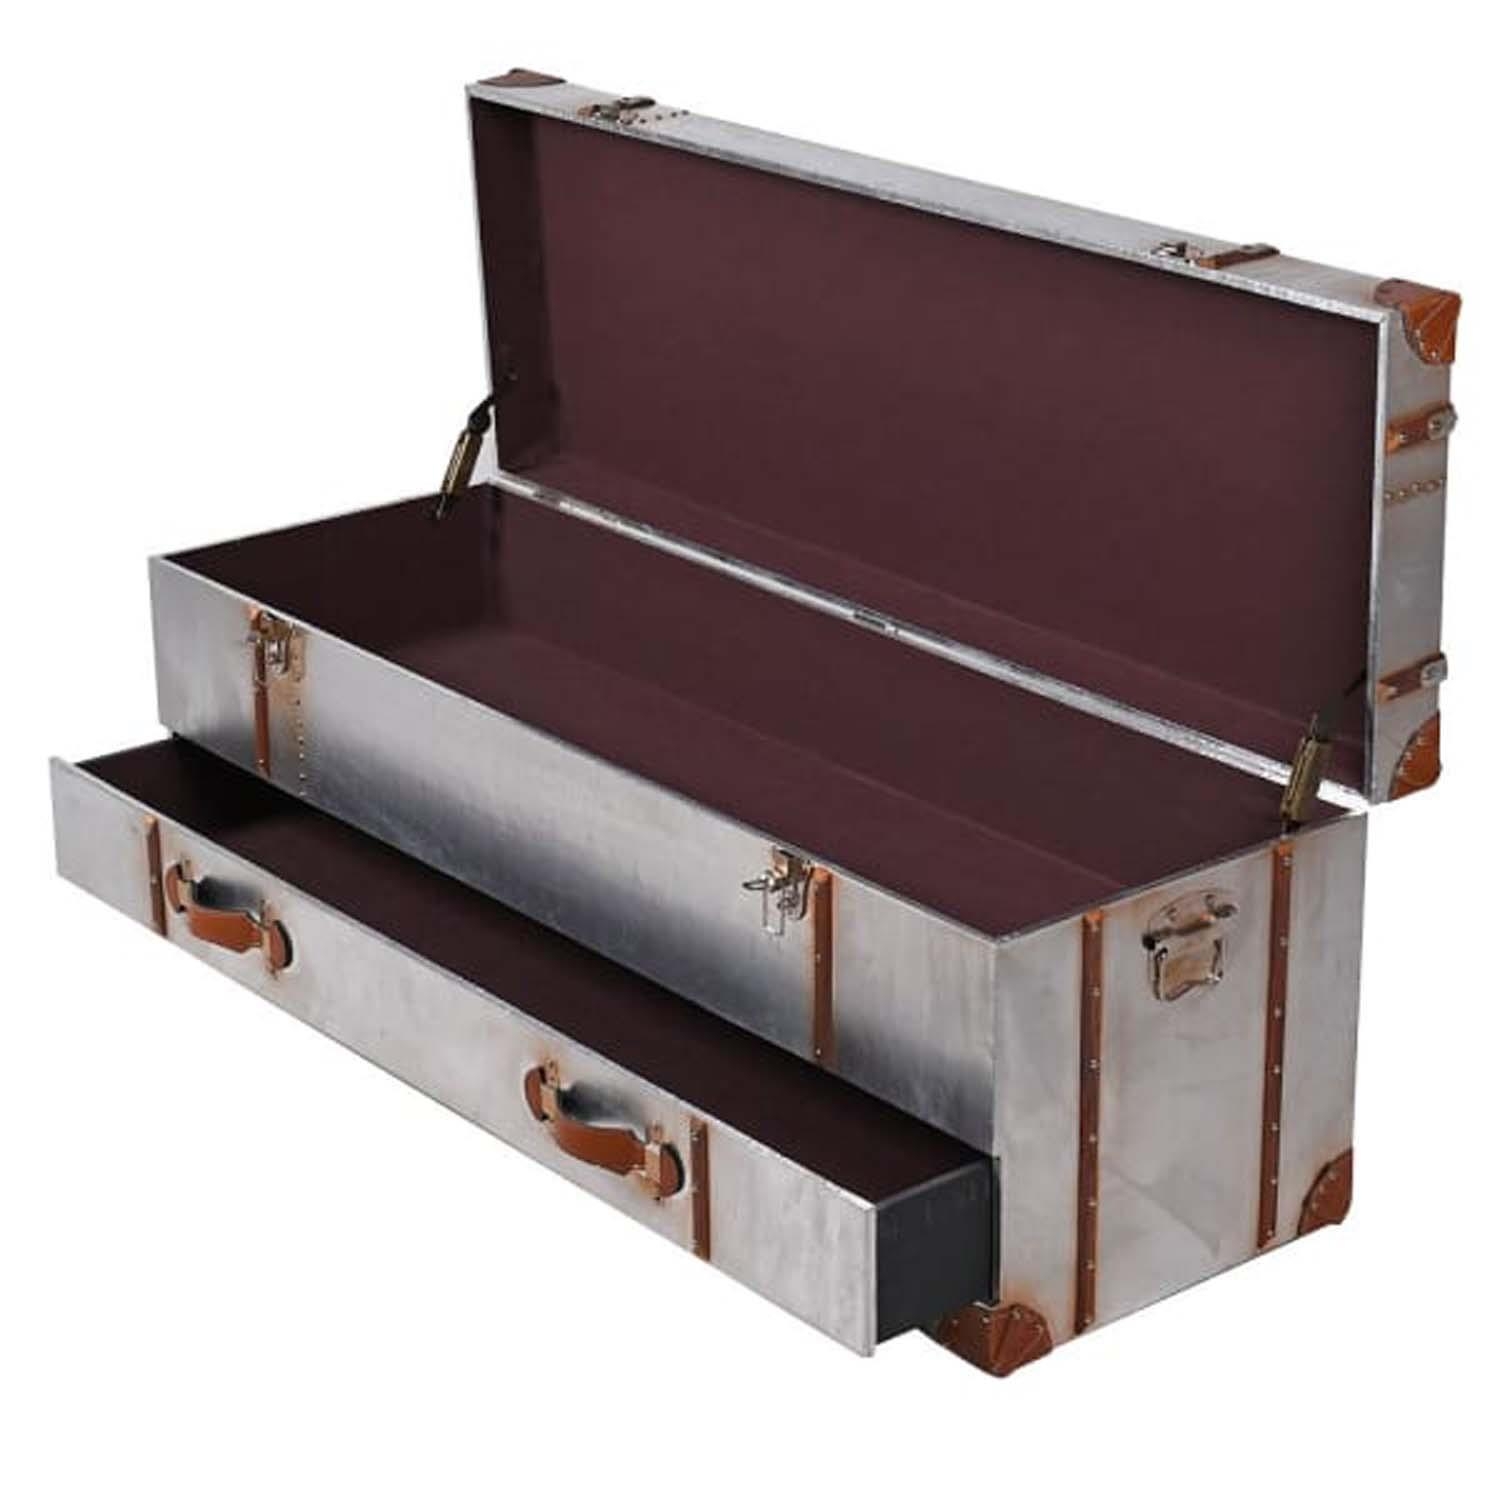 AVIATOR STYLE TRUNK, 45cm high, 120cm wide, 40cm deep, fitted with a single drawer below. - Image 2 of 4